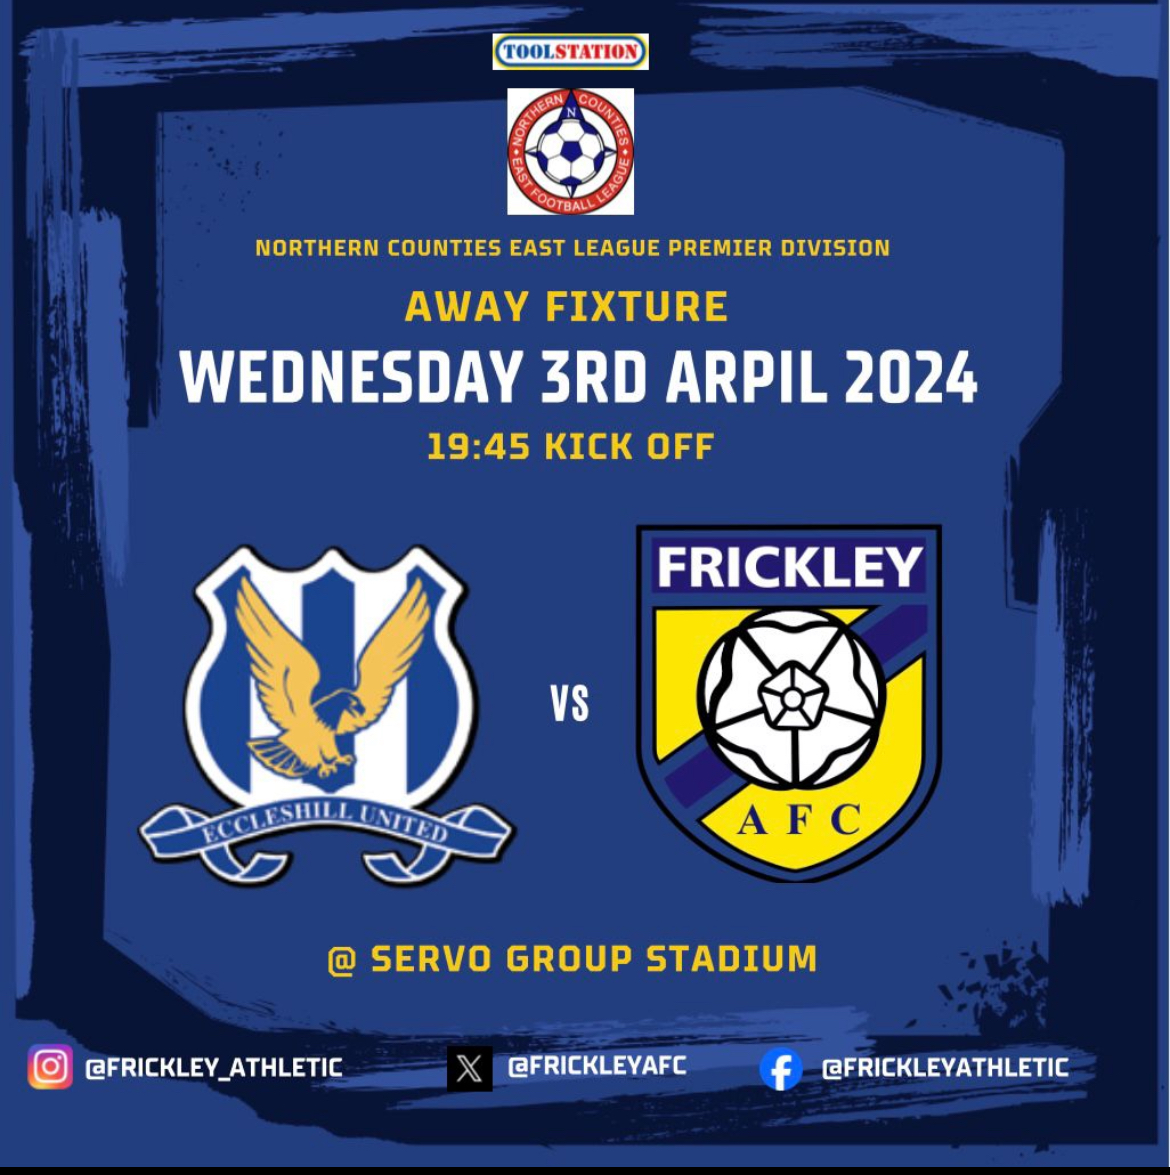 Game Day - Wednesday 3rd April 2024